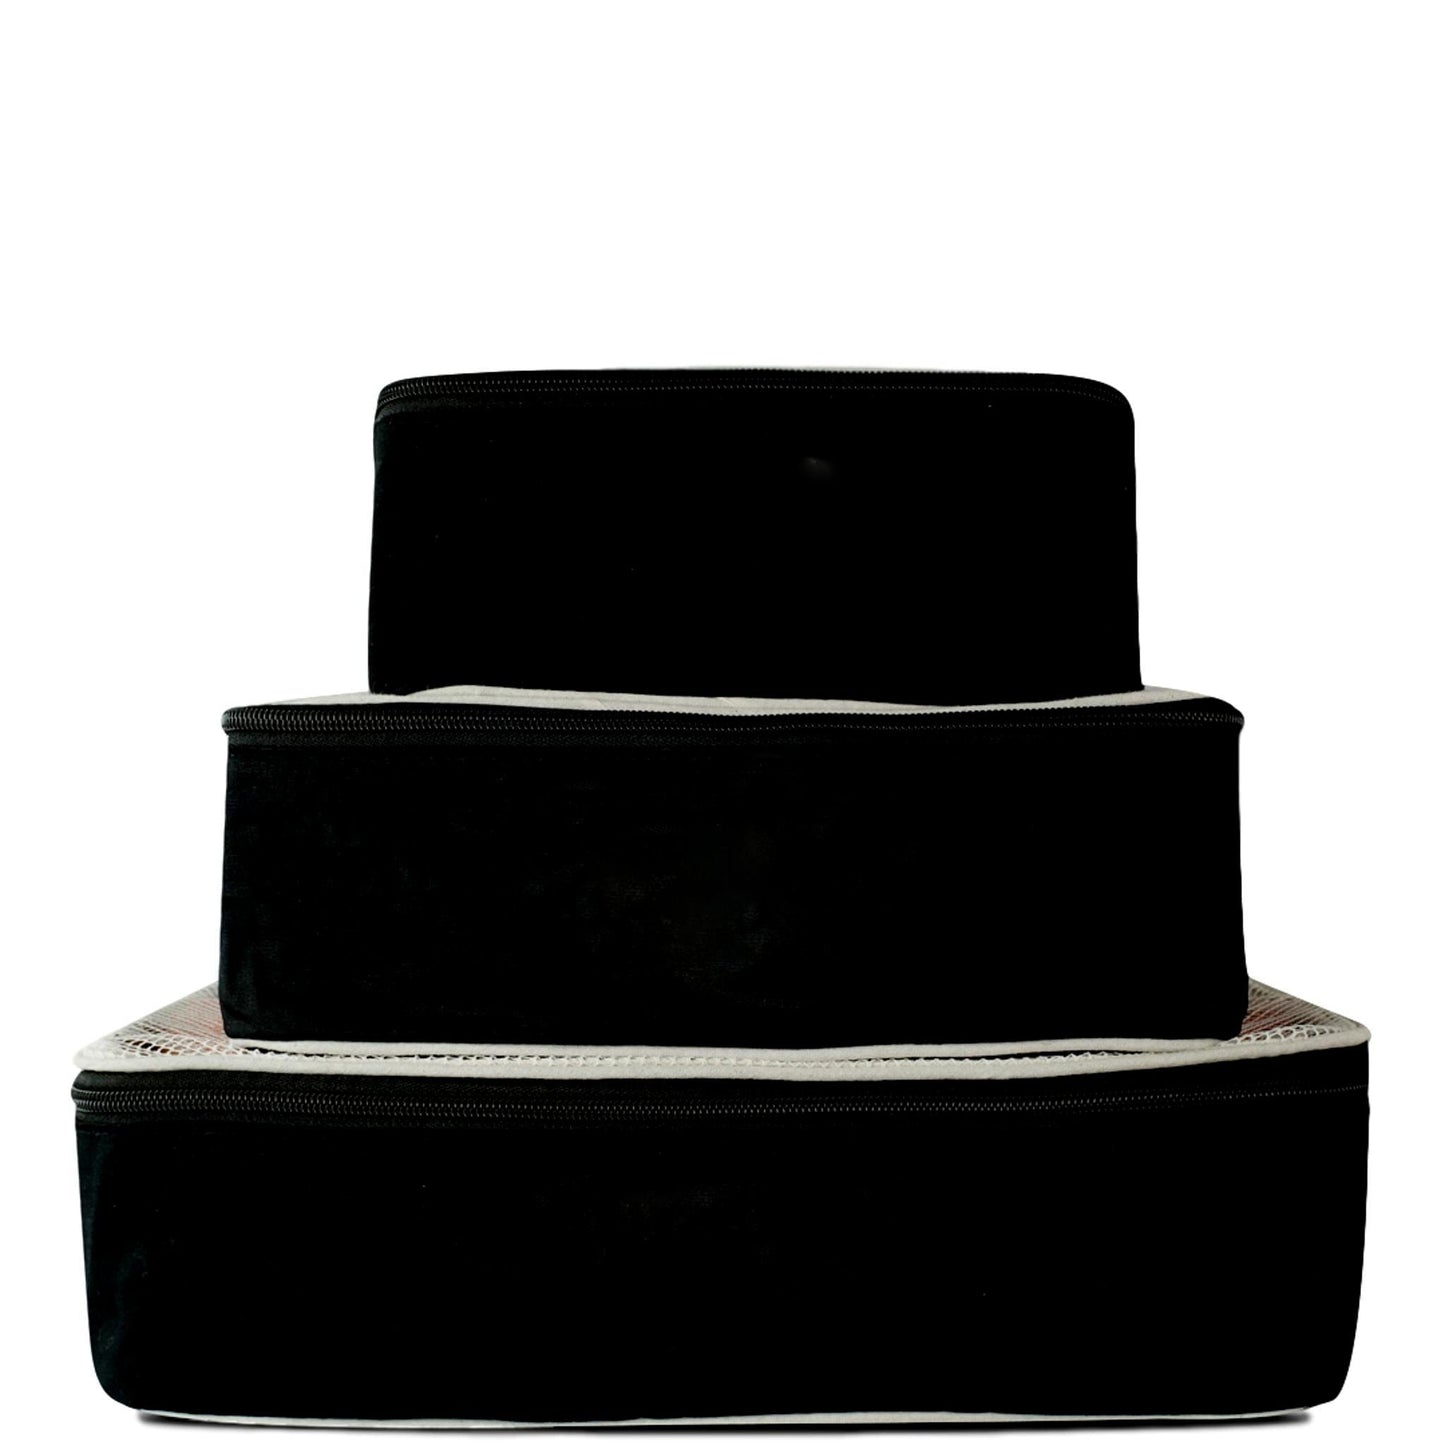 3 black packing cubes in 3 different sizes, small, medium and large.  